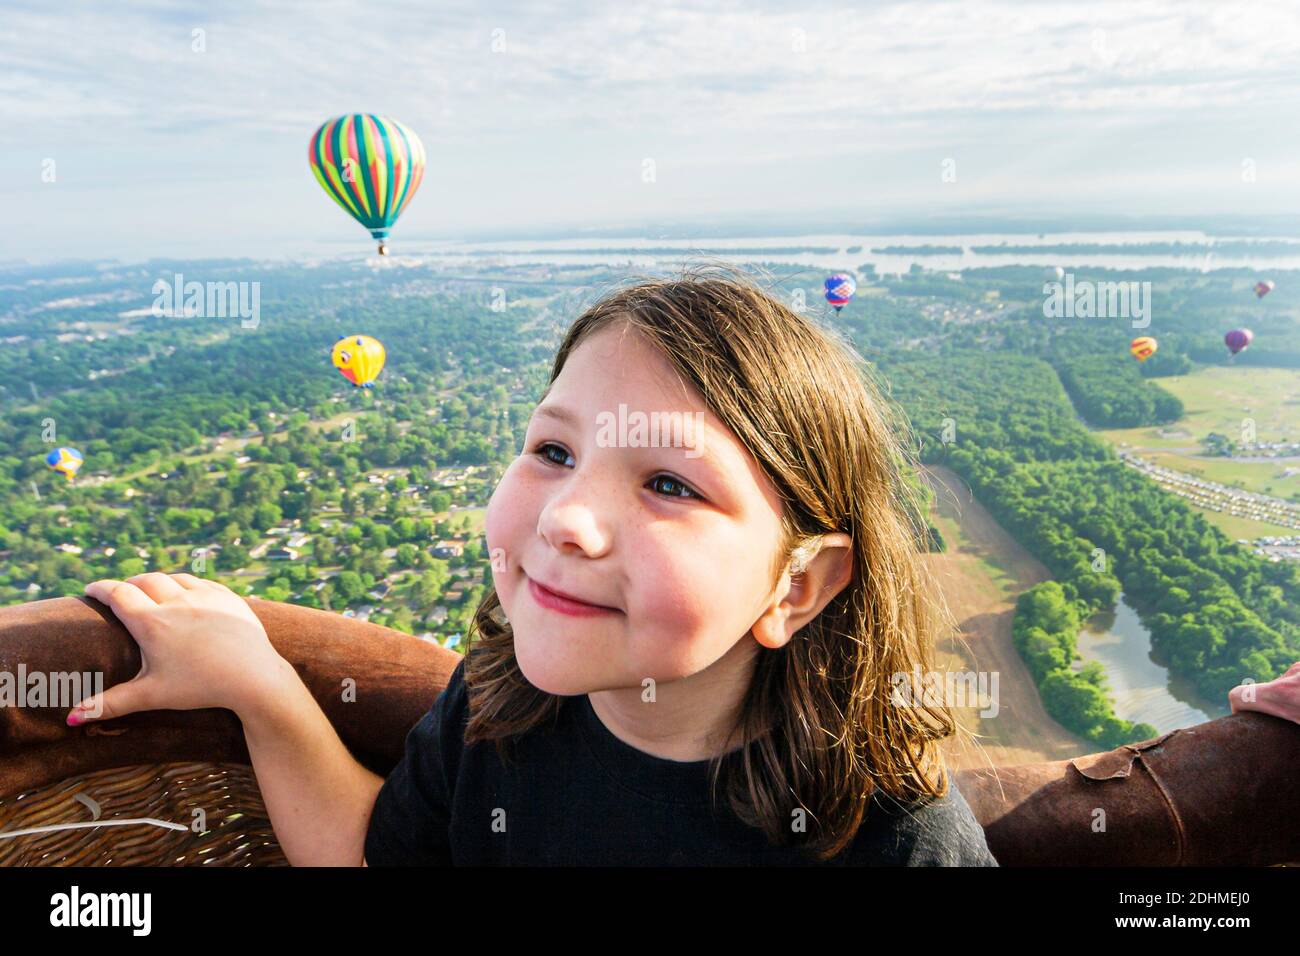 Alabama Decatur Alabama Jubilee Hot Air Balloon Classic,balloons annual event view from gondola aerial girl child,Tennessee River, Stock Photo